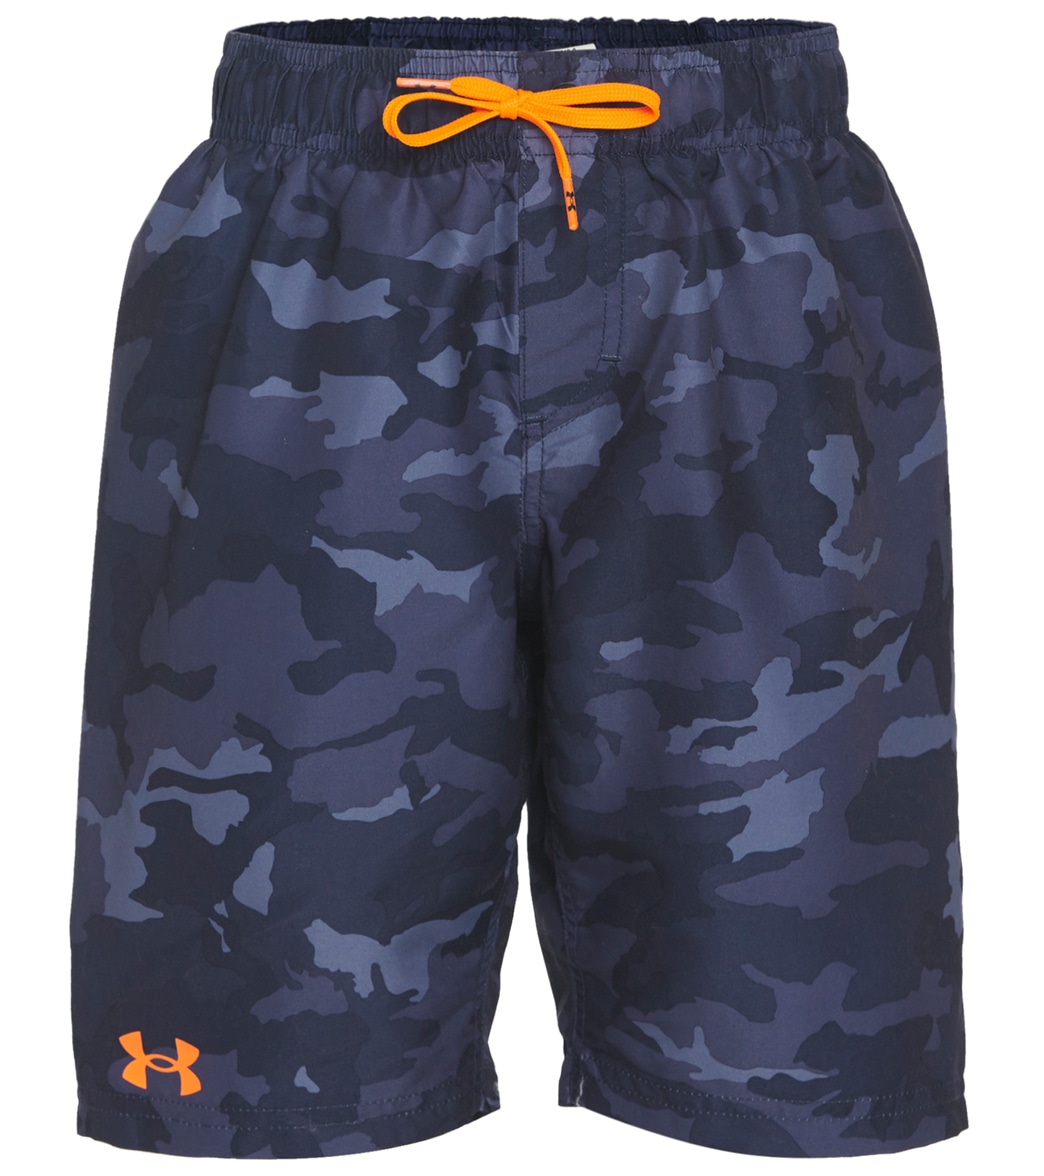 Under Armour Boys' Hyper Woodland Volley Short - Midnight Navy 4 Polyester - Swimoutlet.com